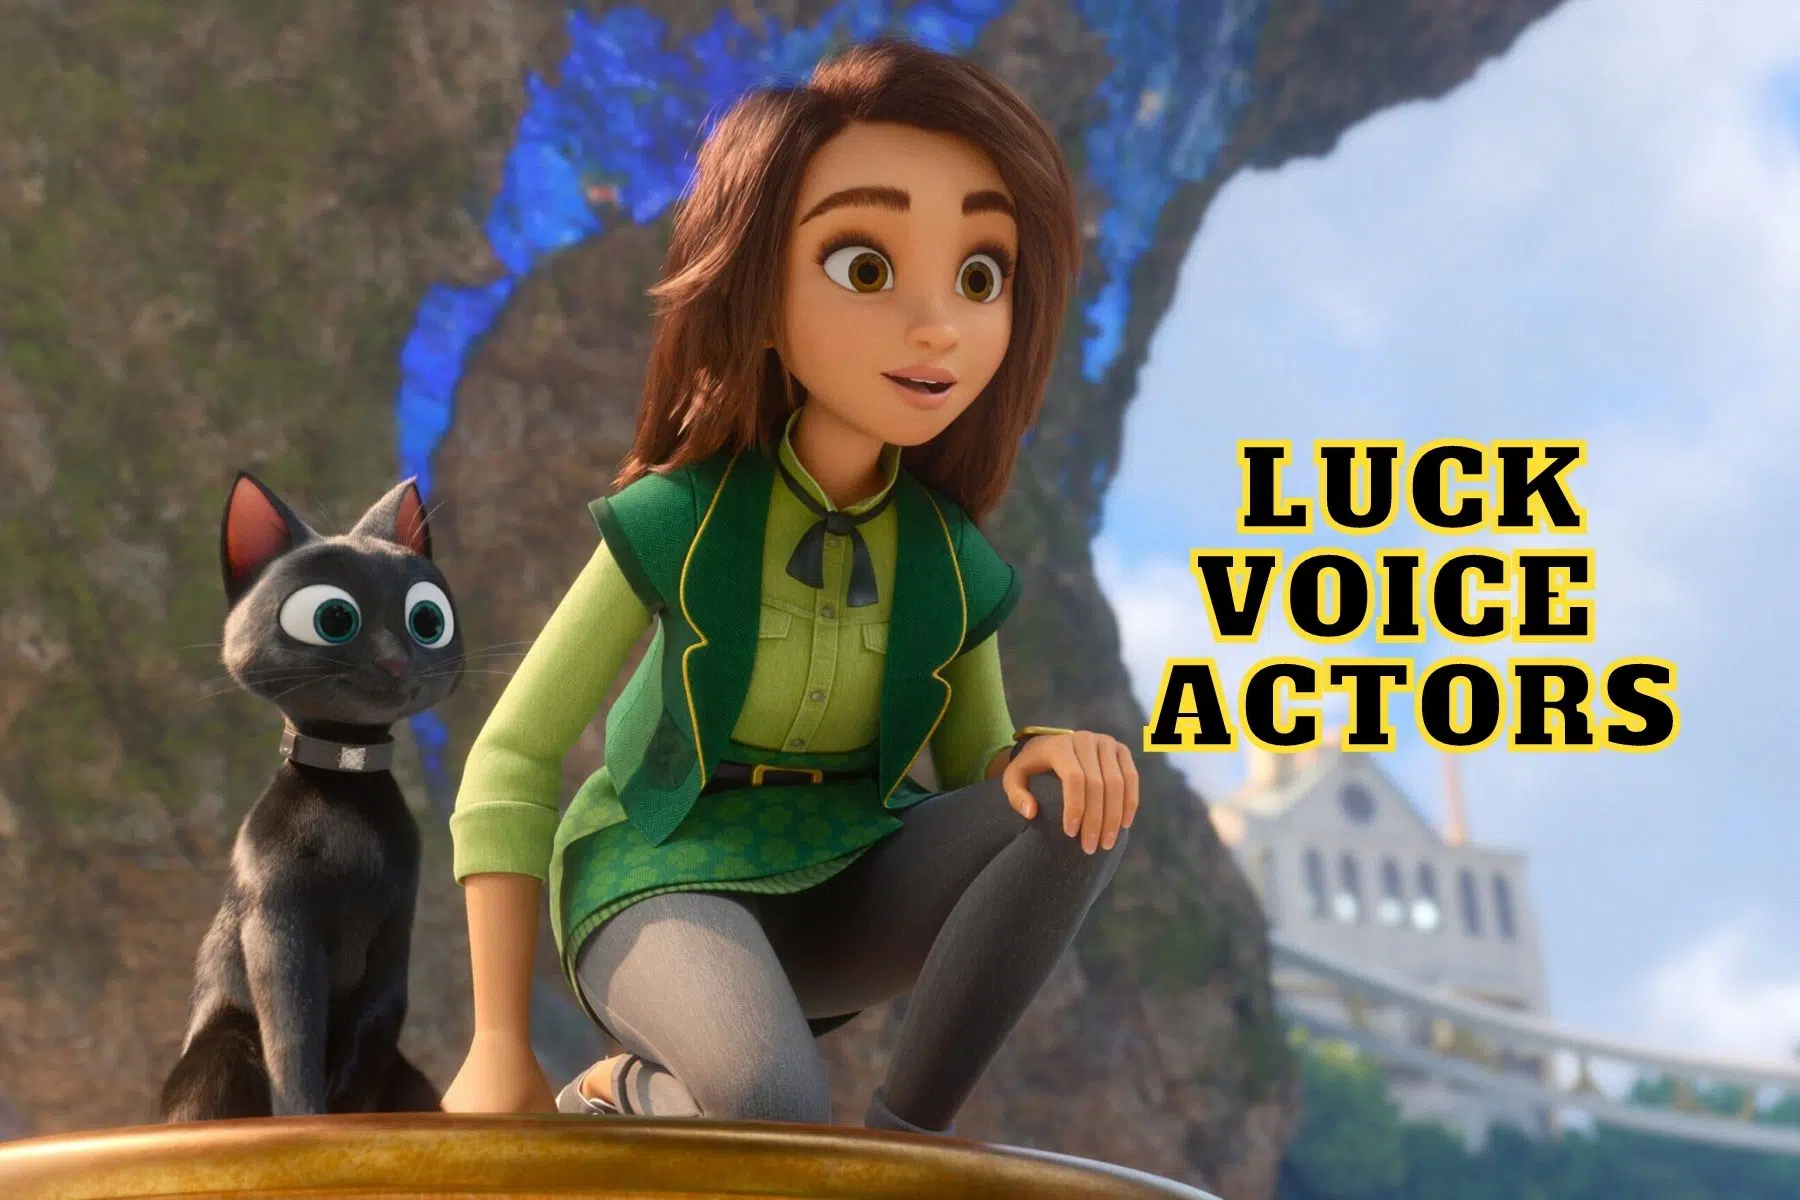 Luck Voice Actors - Ages, Partners, Characters